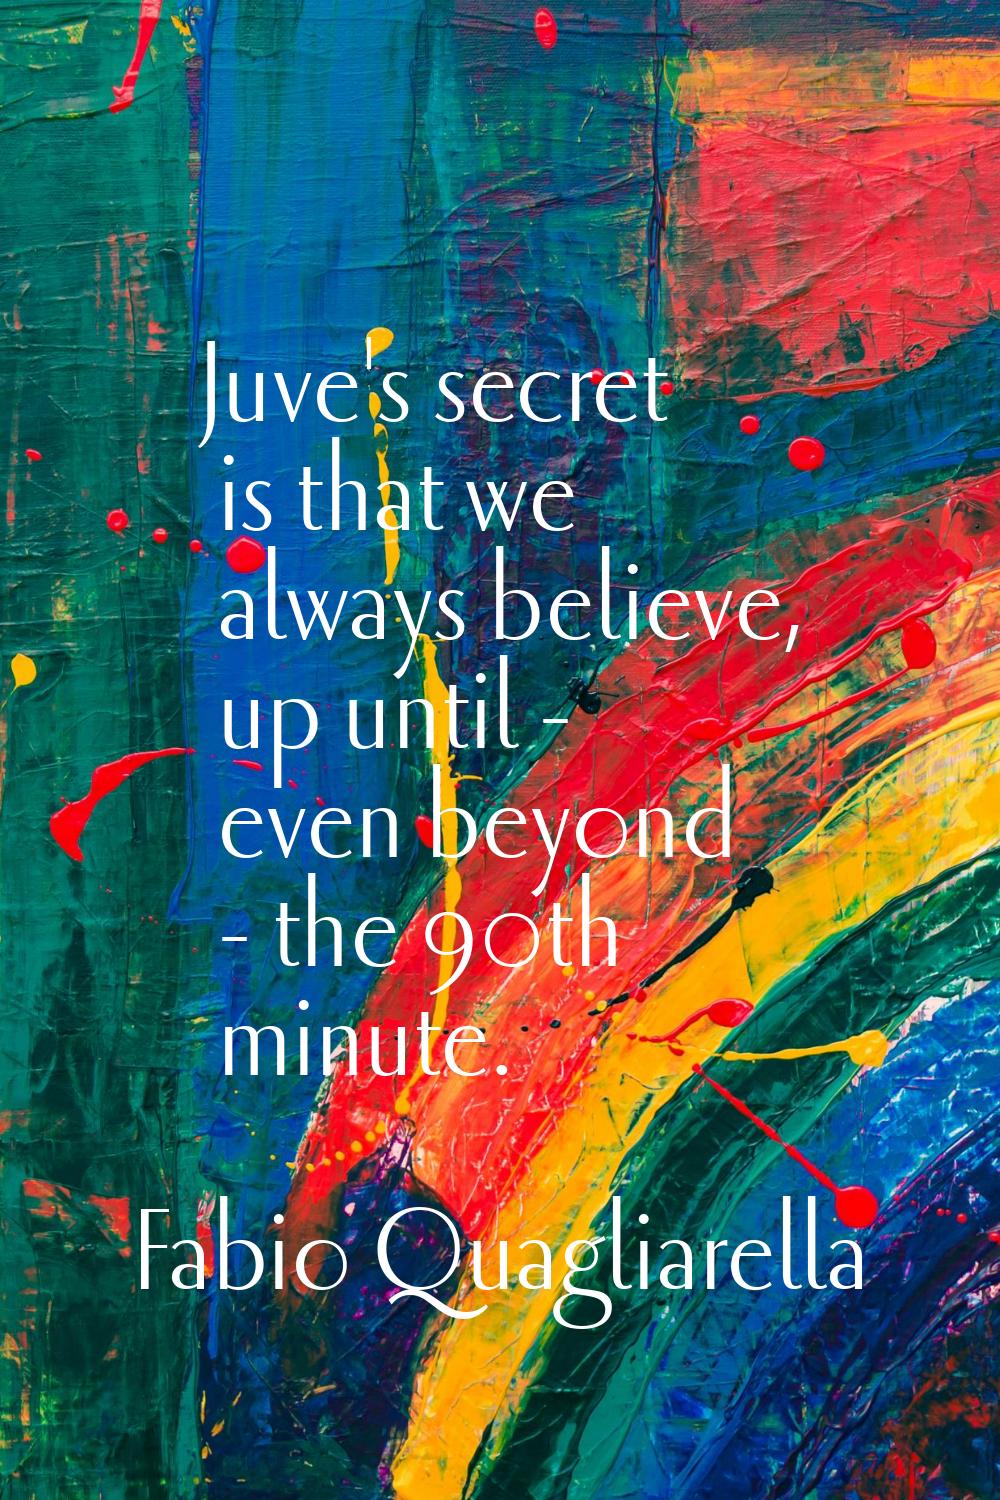 Juve's secret is that we always believe, up until - even beyond - the 90th minute.